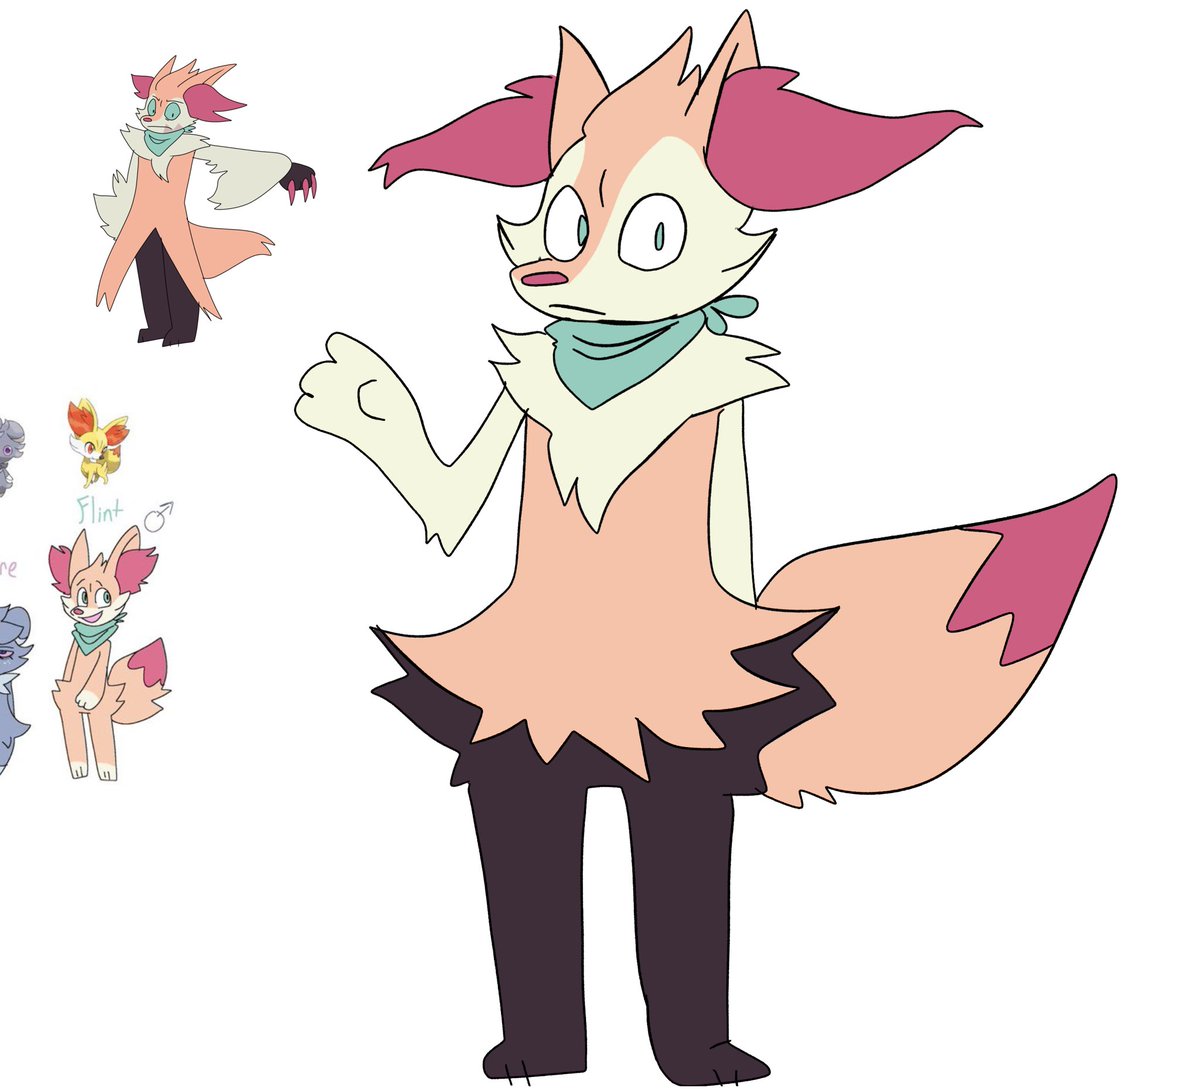 also made this thing where flint's evolution goes fine and evolves into a normal braixen